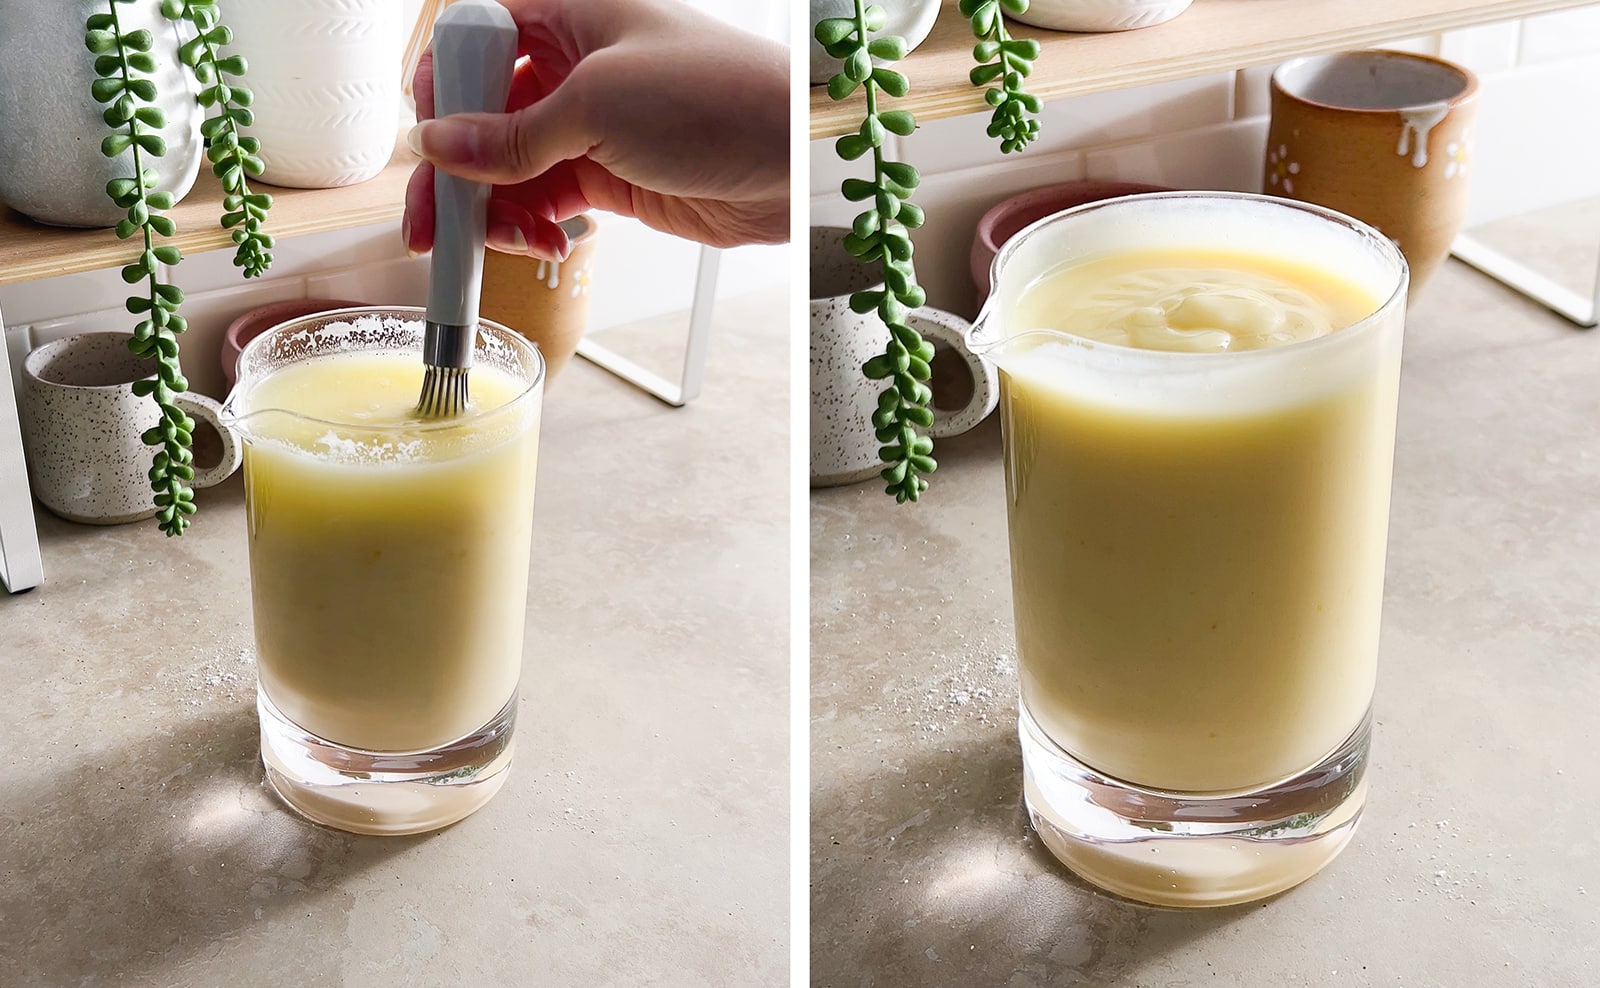 Left to right: hand whisking pudding together, pudding mixture in glass container.